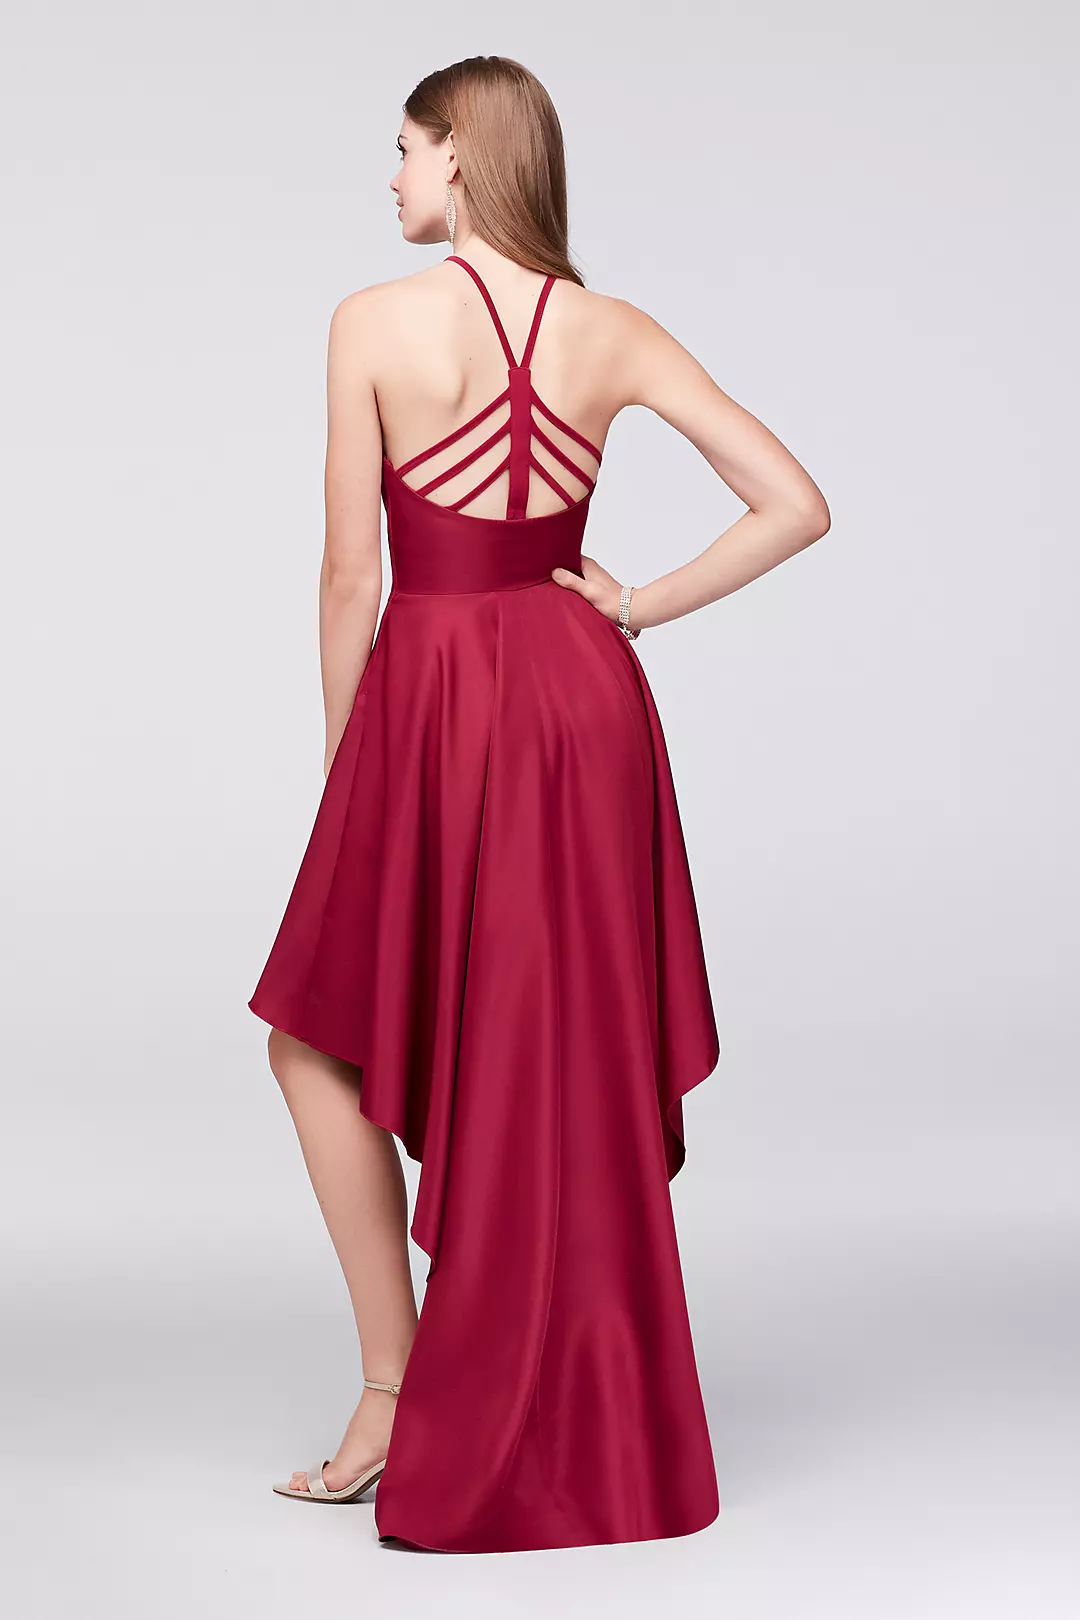 High-Low Mikado Halter Dress with Strappy Back Image 2